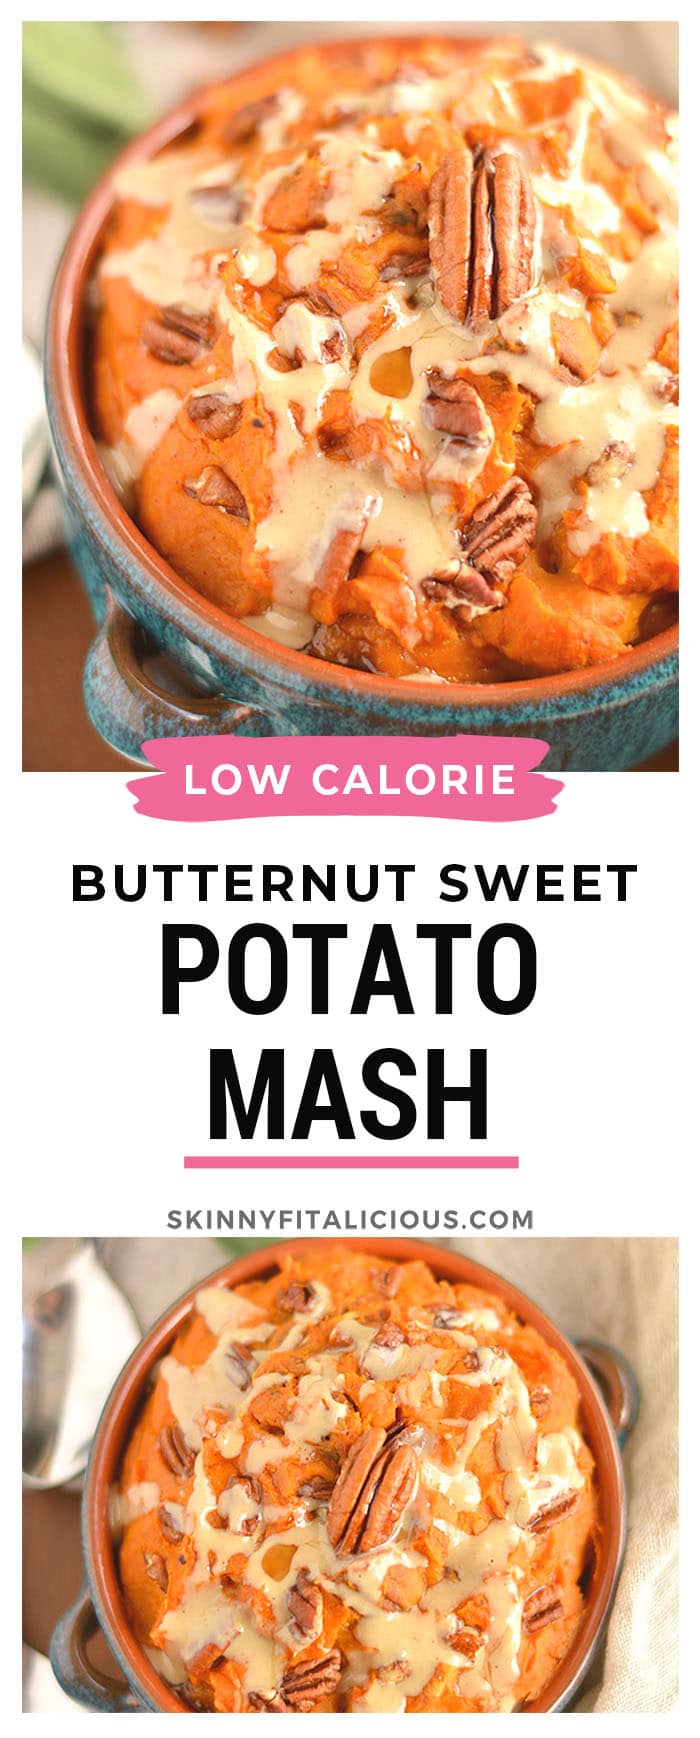 Maple Tahini Butternut Sweet Potato Mash is a healthier version of sweet potato casserole. Lightly sweetened with maple syrup, savory tahini sauce and topped with pecans to make the perfect side dish for fall, winter and holiday gatherings. Gluten Free + Low Calorie + Vegan + Paleo